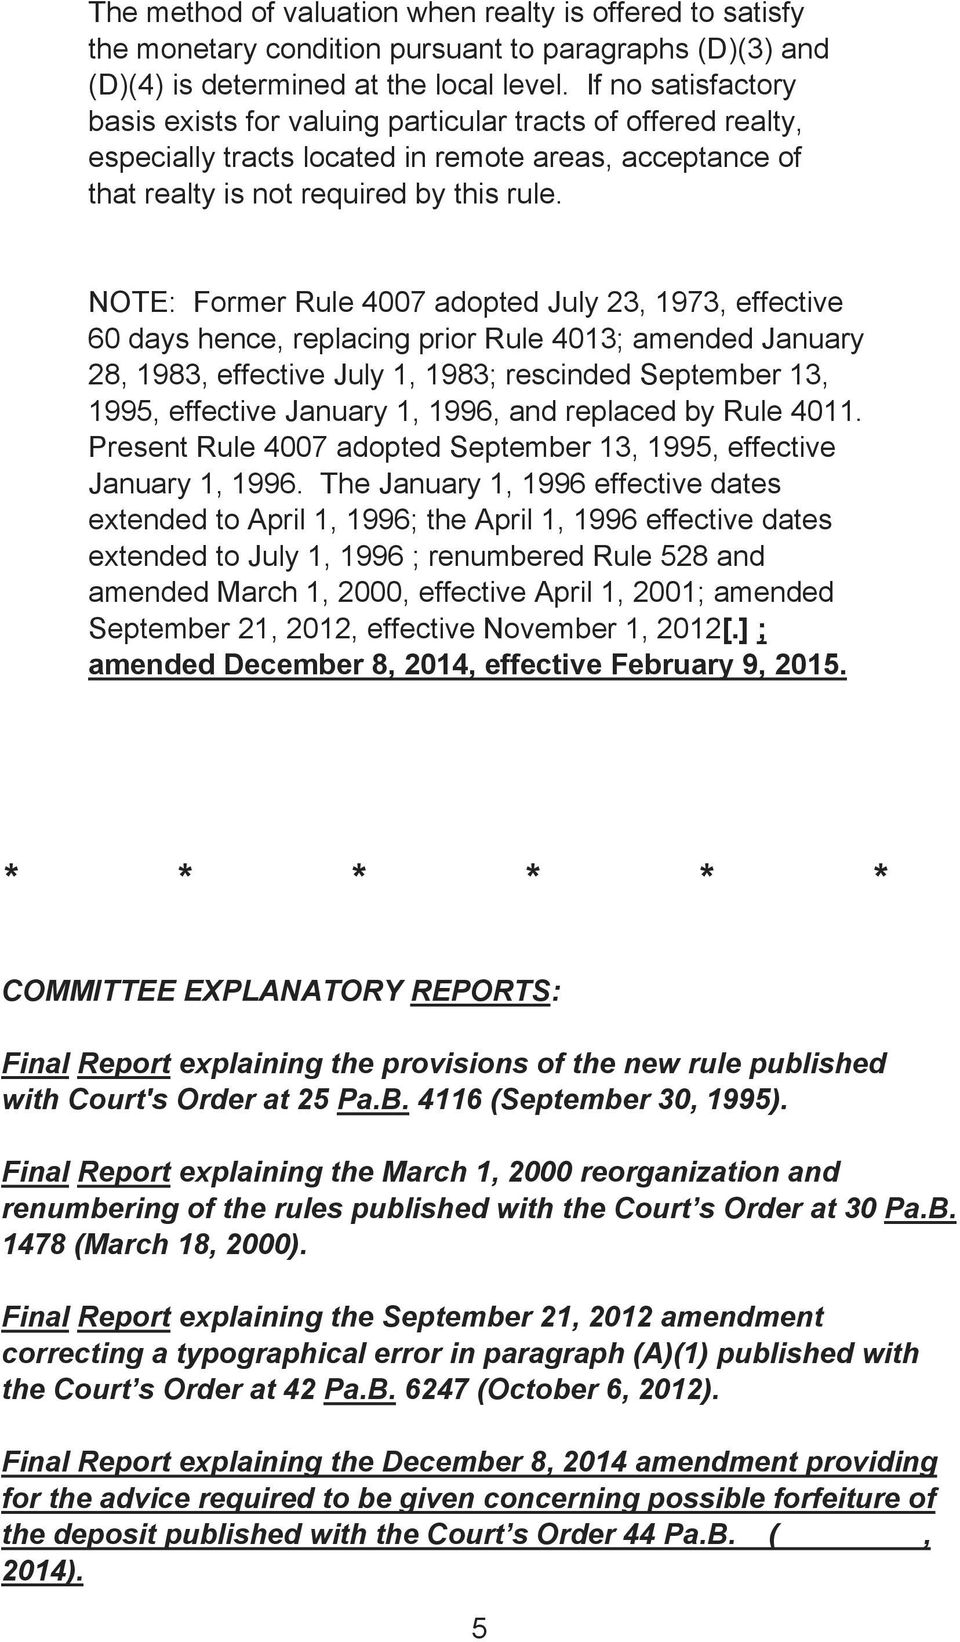 NOTE: Former Rule 4007 adopted July 23, 1973, effective 60 days hence, replacing prior Rule 4013; amended January 28, 1983, effective July 1, 1983; rescinded September 13, 1995, effective January 1,